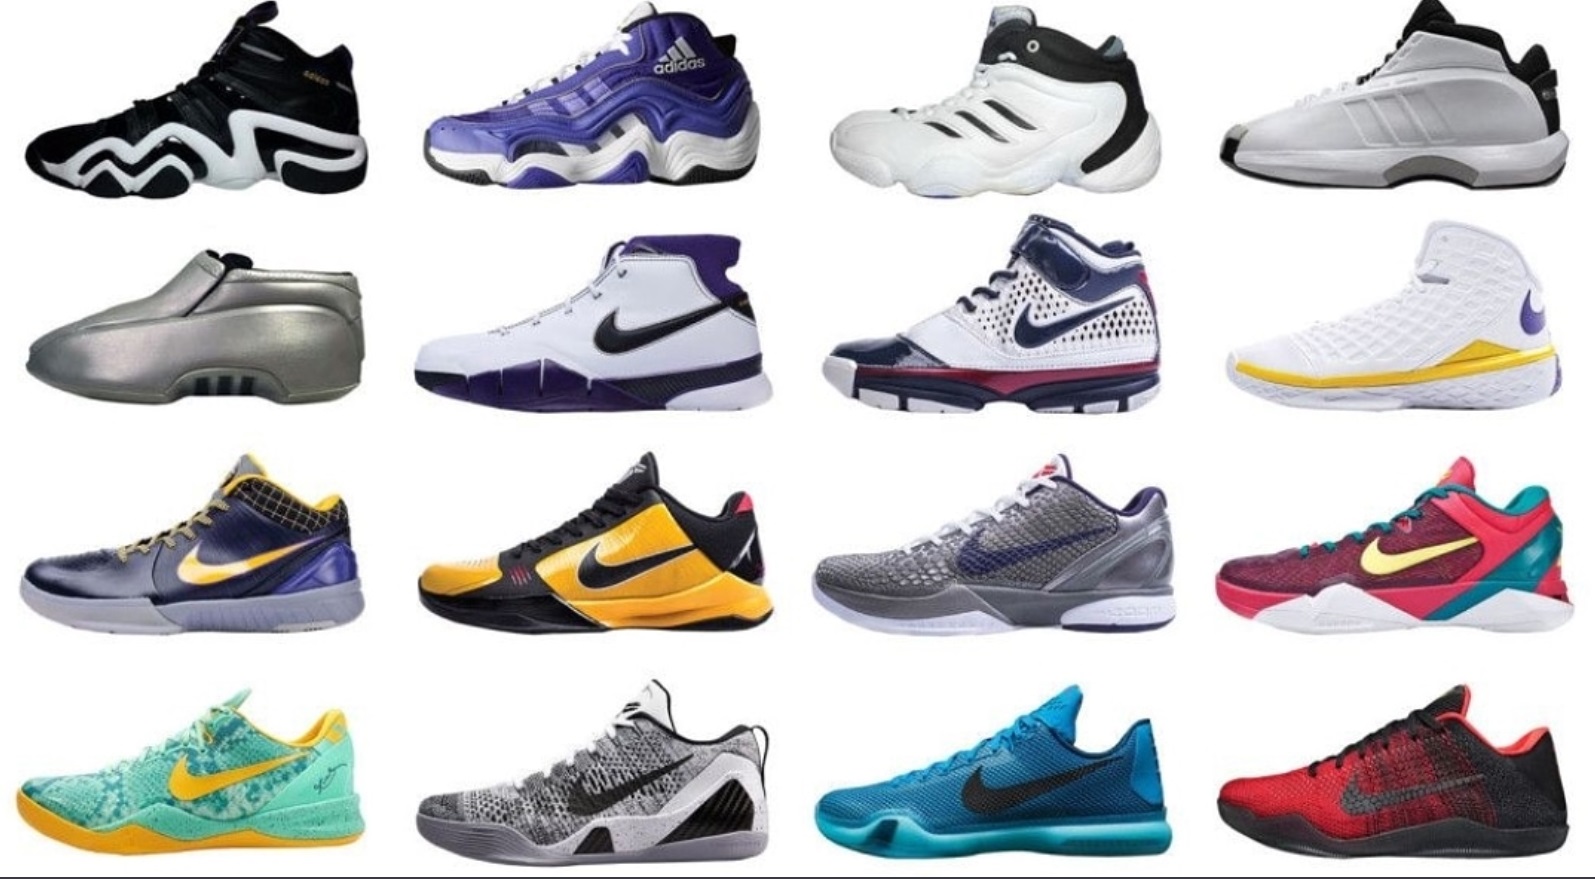 Signature Shoes Through The Years